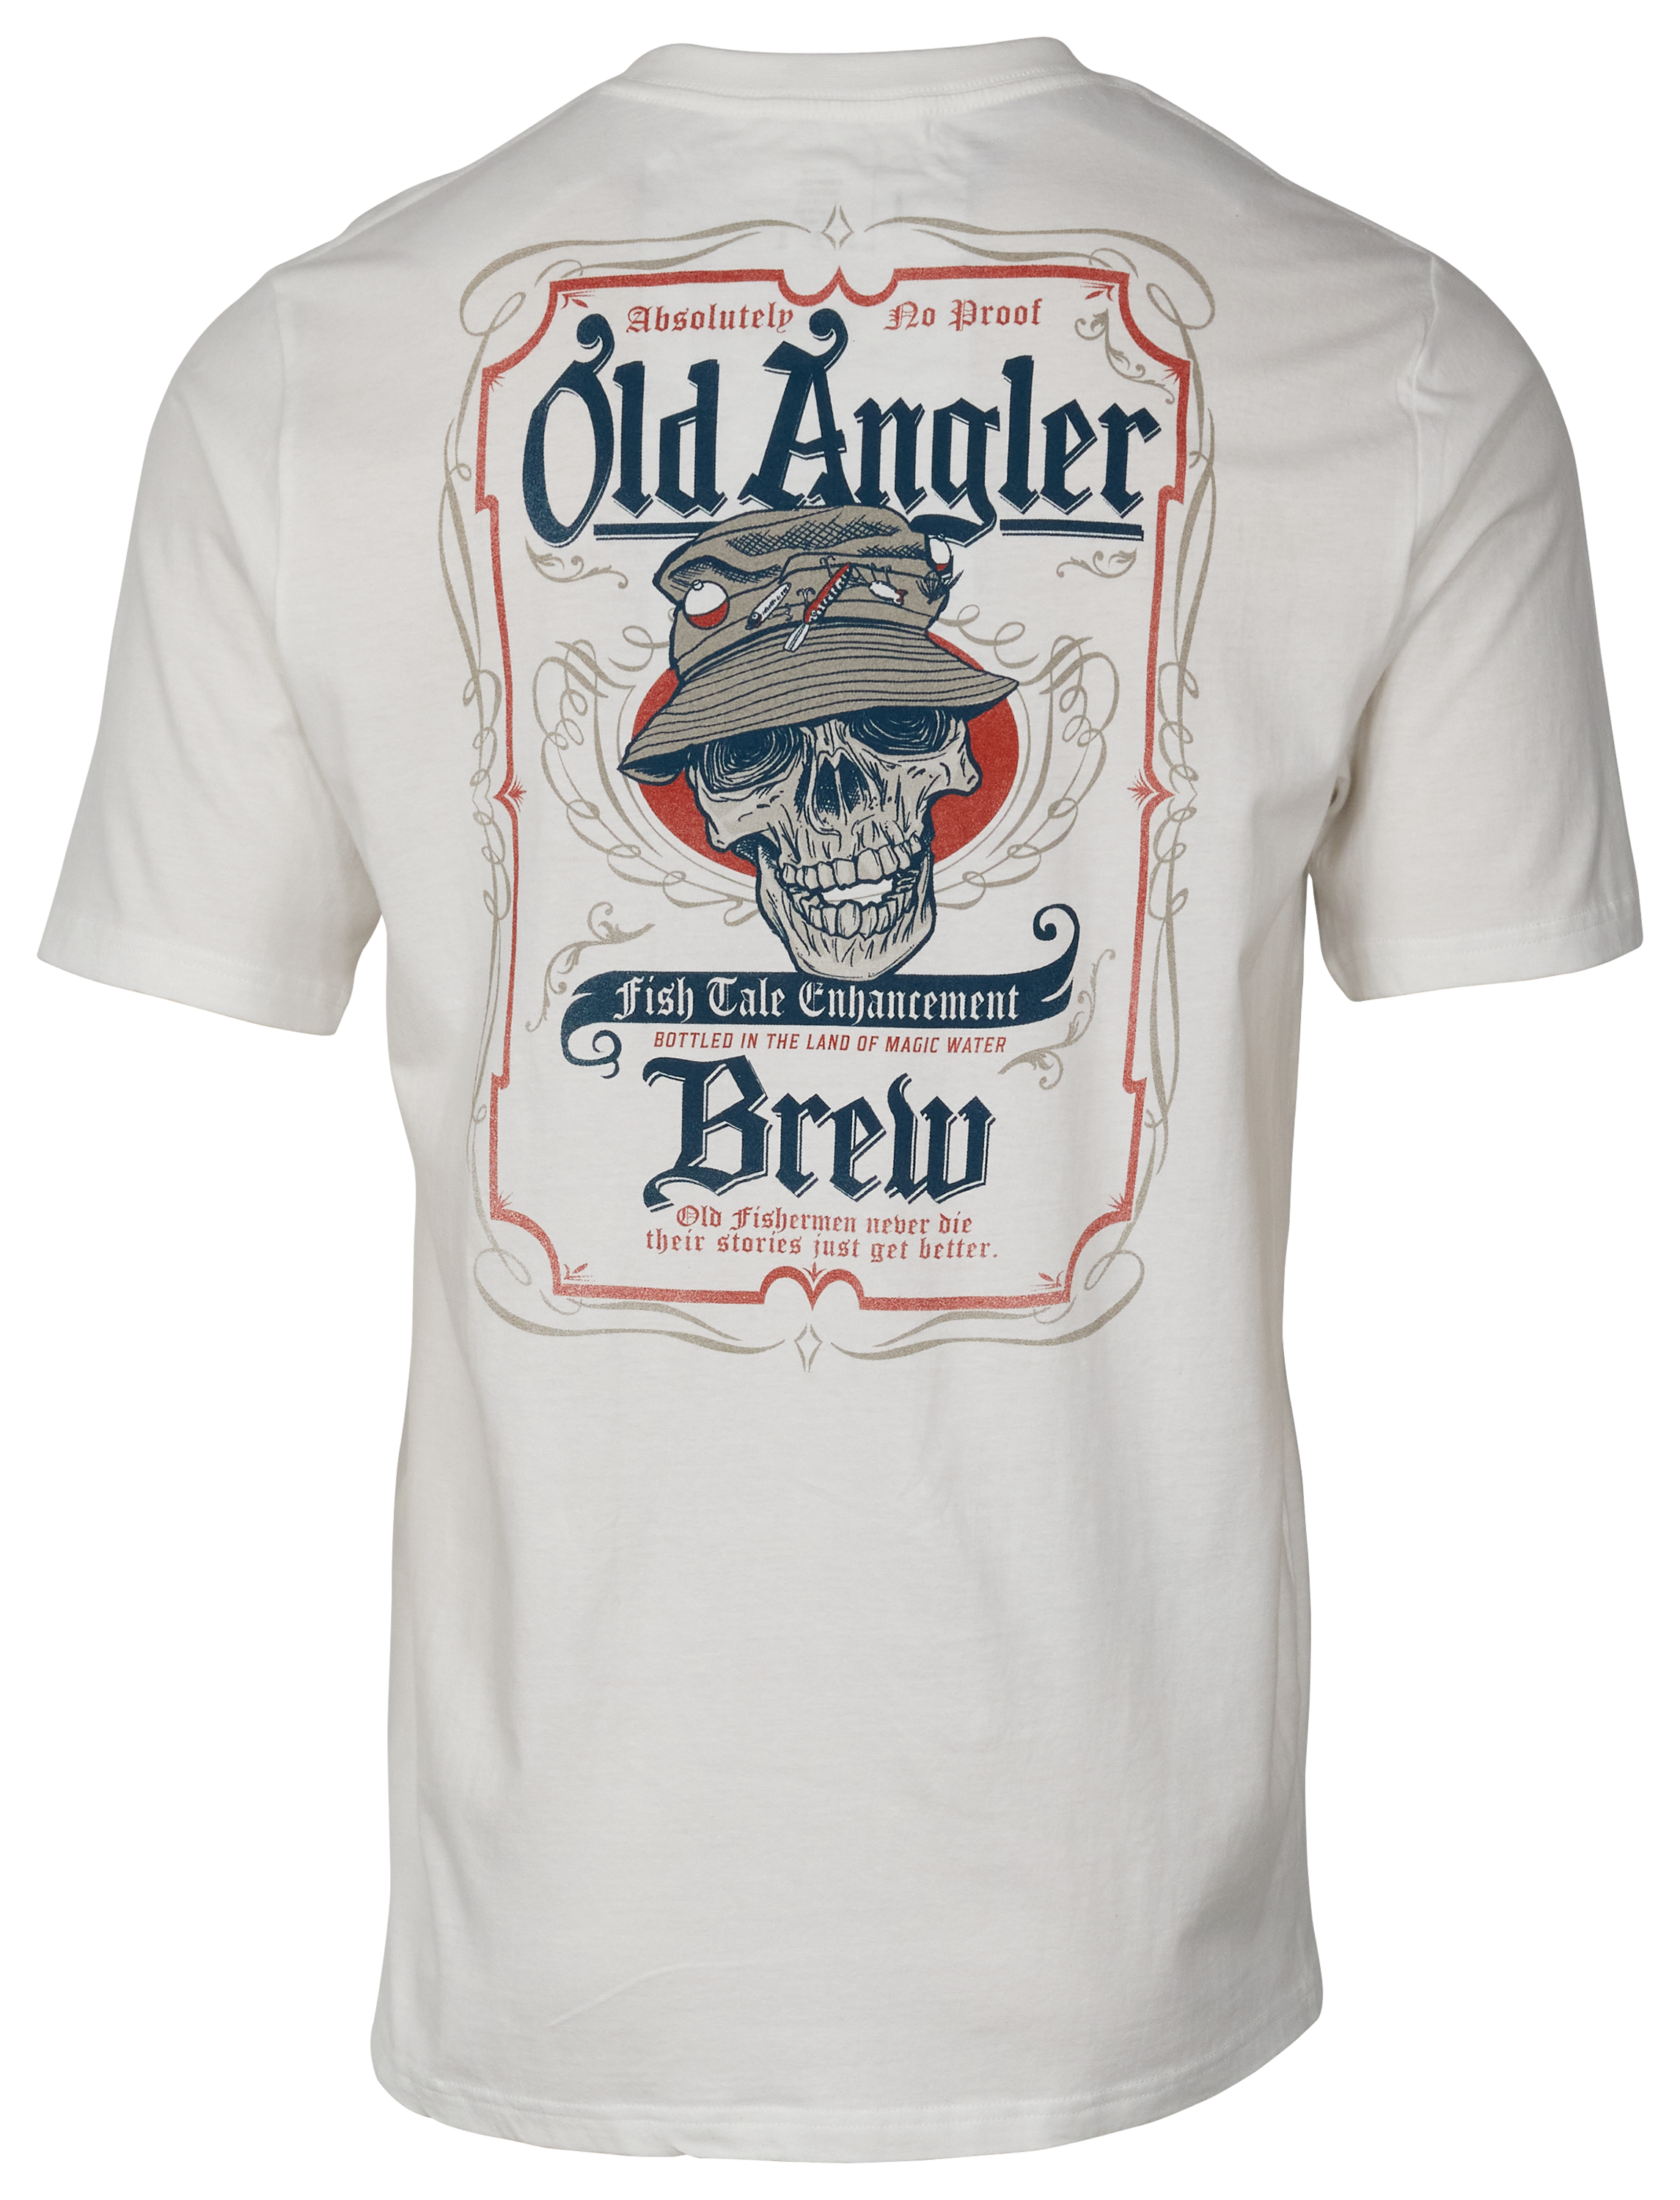 Vintage Fishing Shirt for Men and Women - Angler Apparel for Fishing  Enthusiasts T-Shirt - Clear